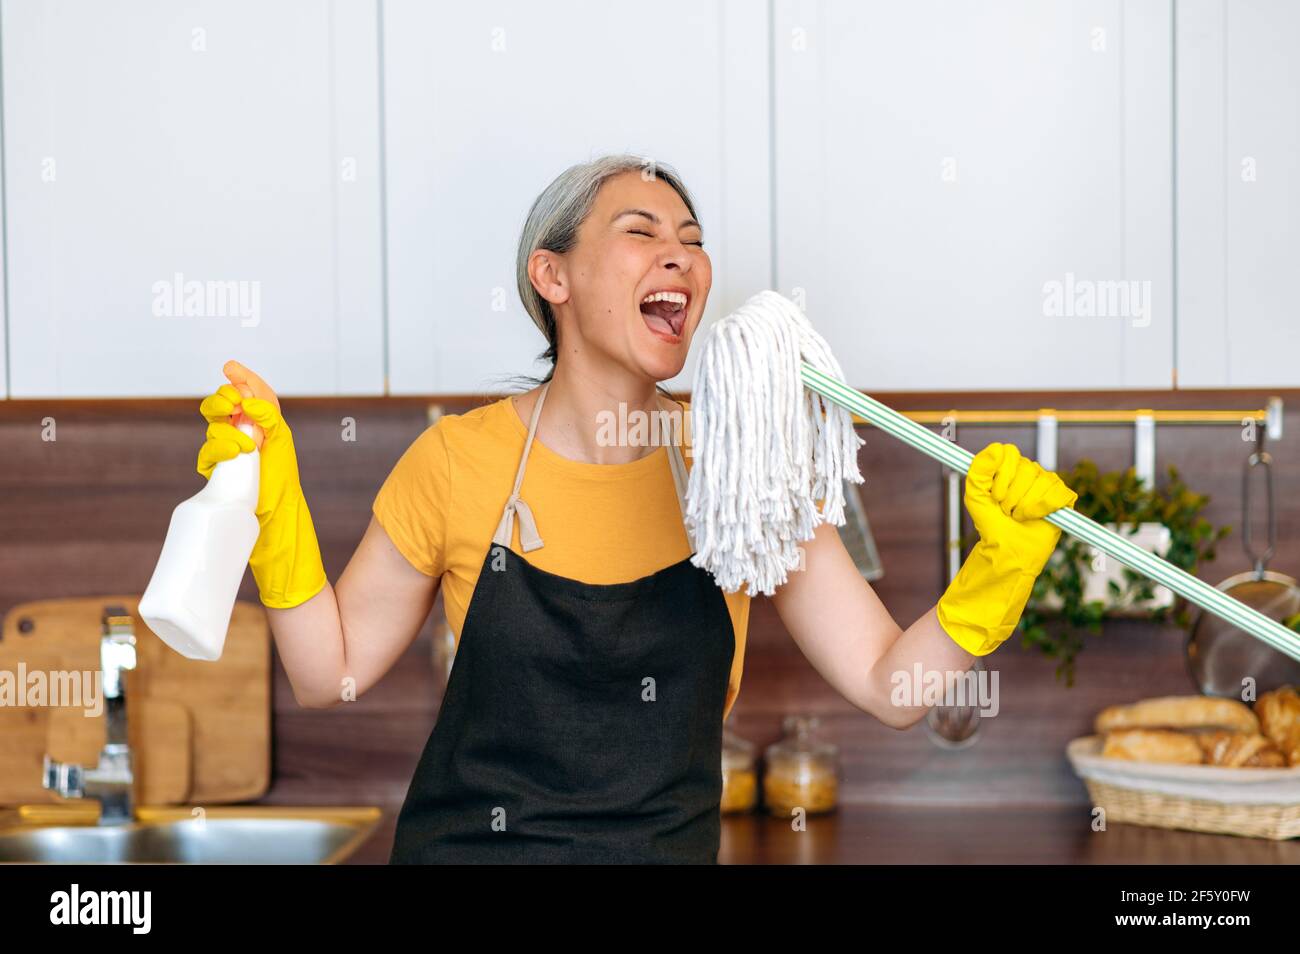 Happy funny hardworking mature gray-haired asian female cleaning worker or housewife in gloves and apron, taking a break, dancing in the kitchen with detergent and mop, singing her favorite song Stock Photo